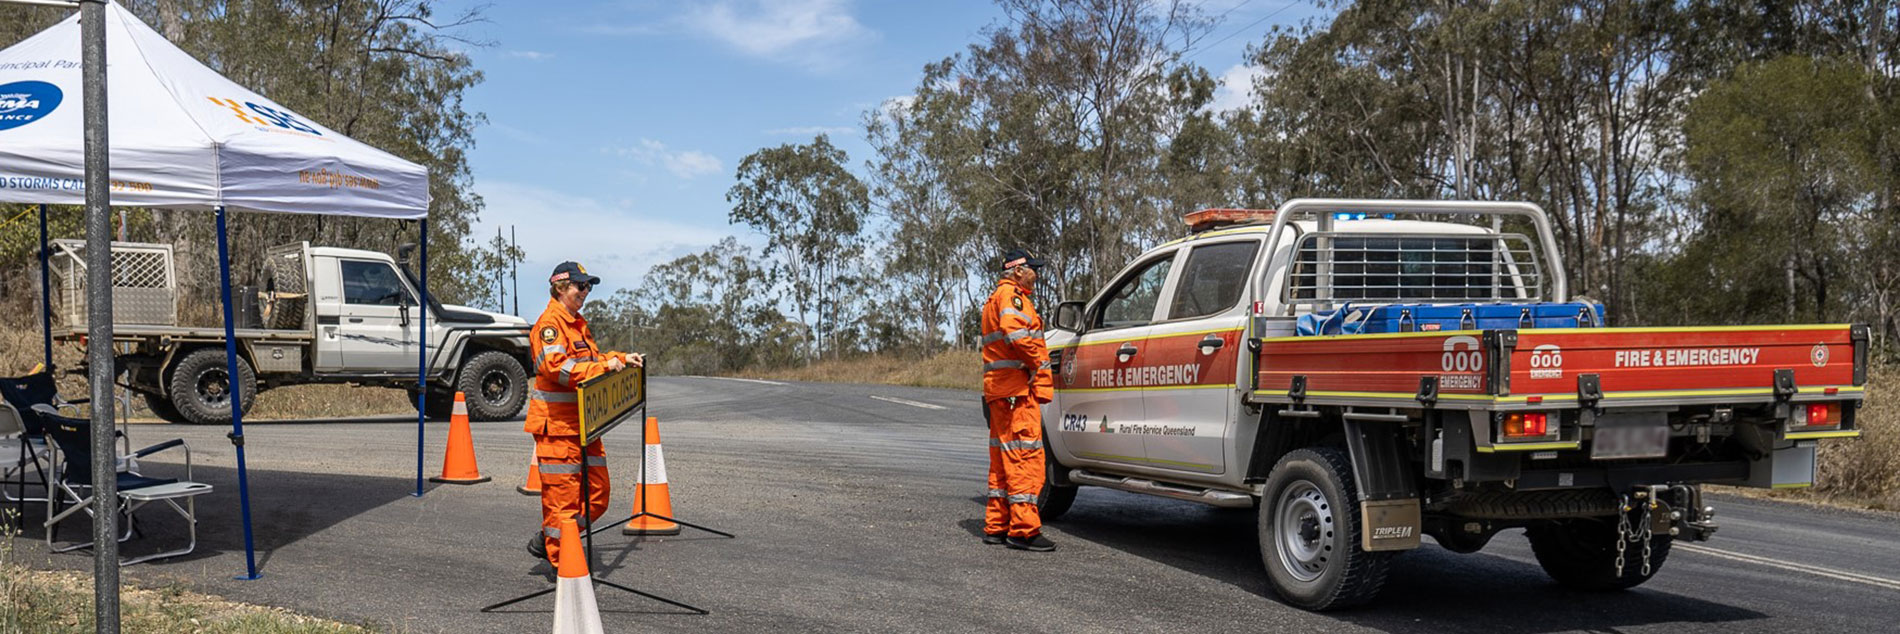 Deepwater fire 2023 road closure with ses and vehicles